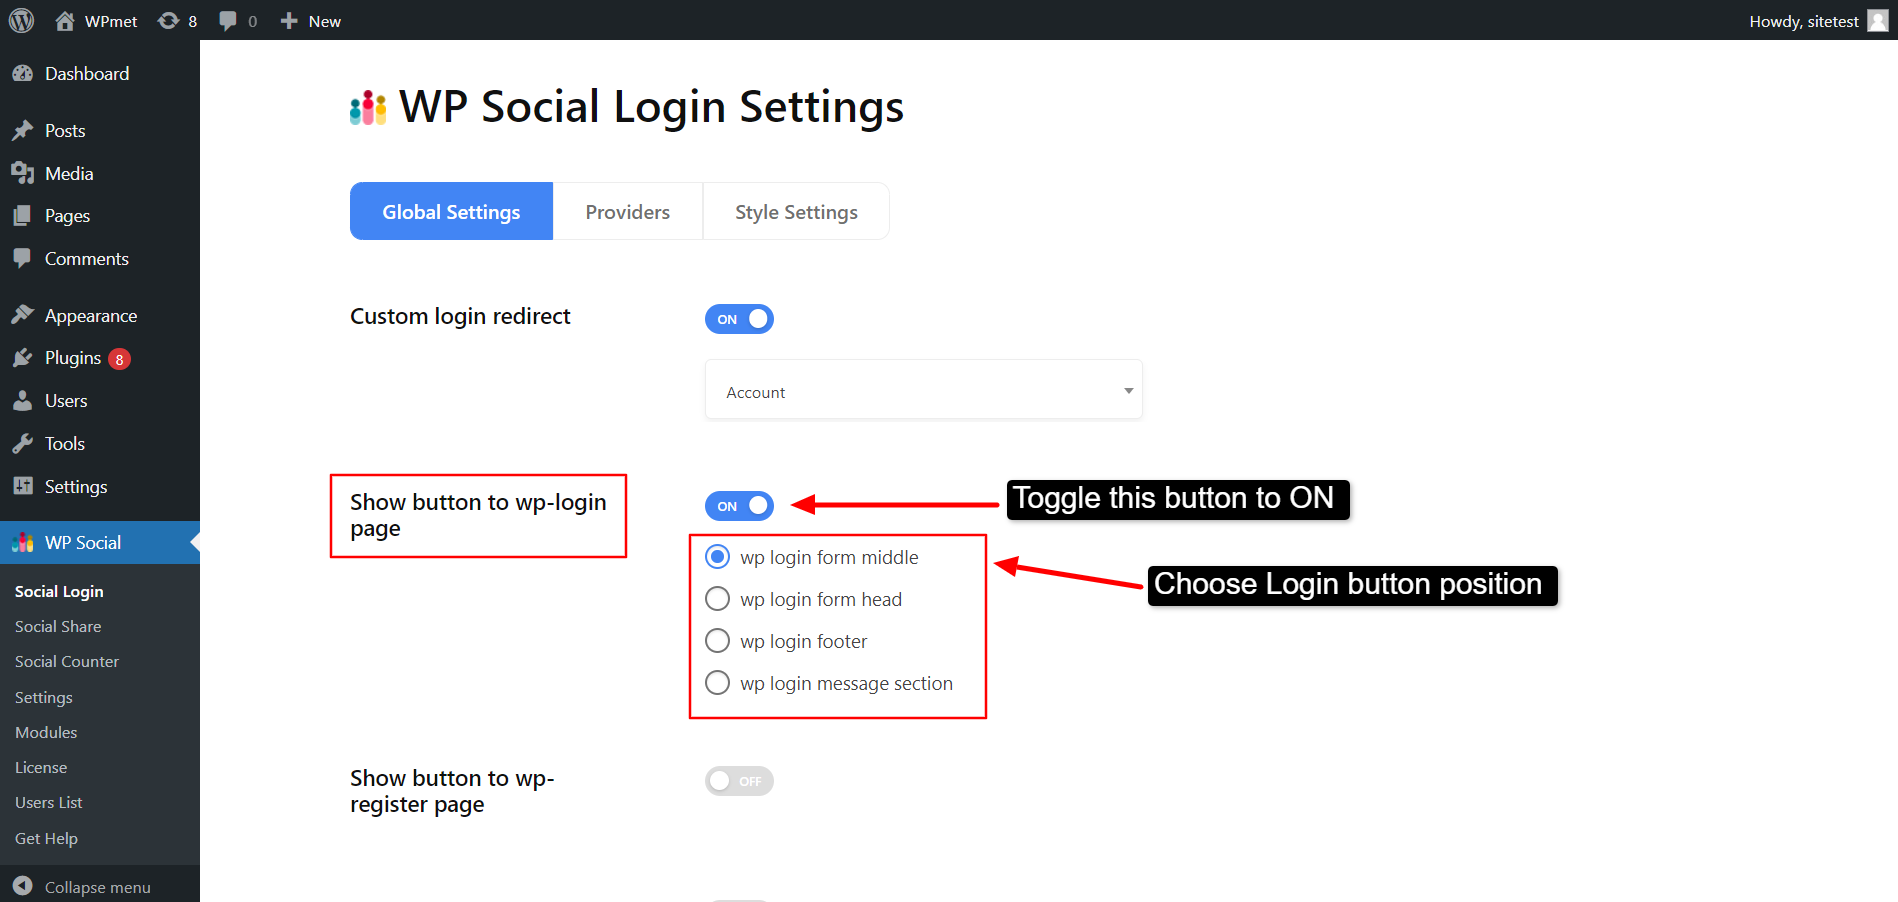  Show button to WP-login page